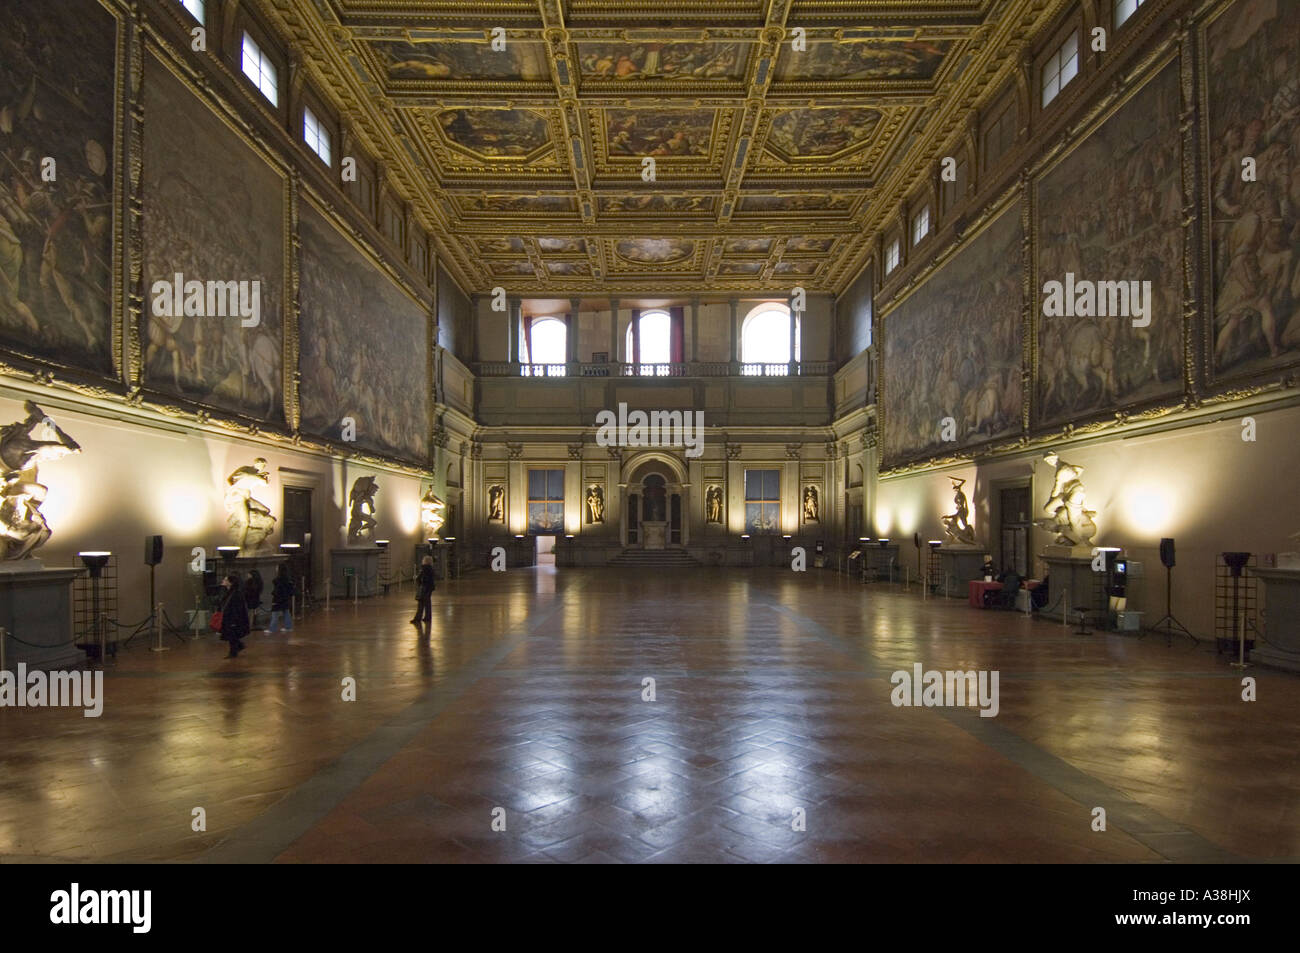 A view of the Salone dei Cinquecento inside the Palazzo Vecchio in Florence showing the painted walls and ceiling. Stock Photo